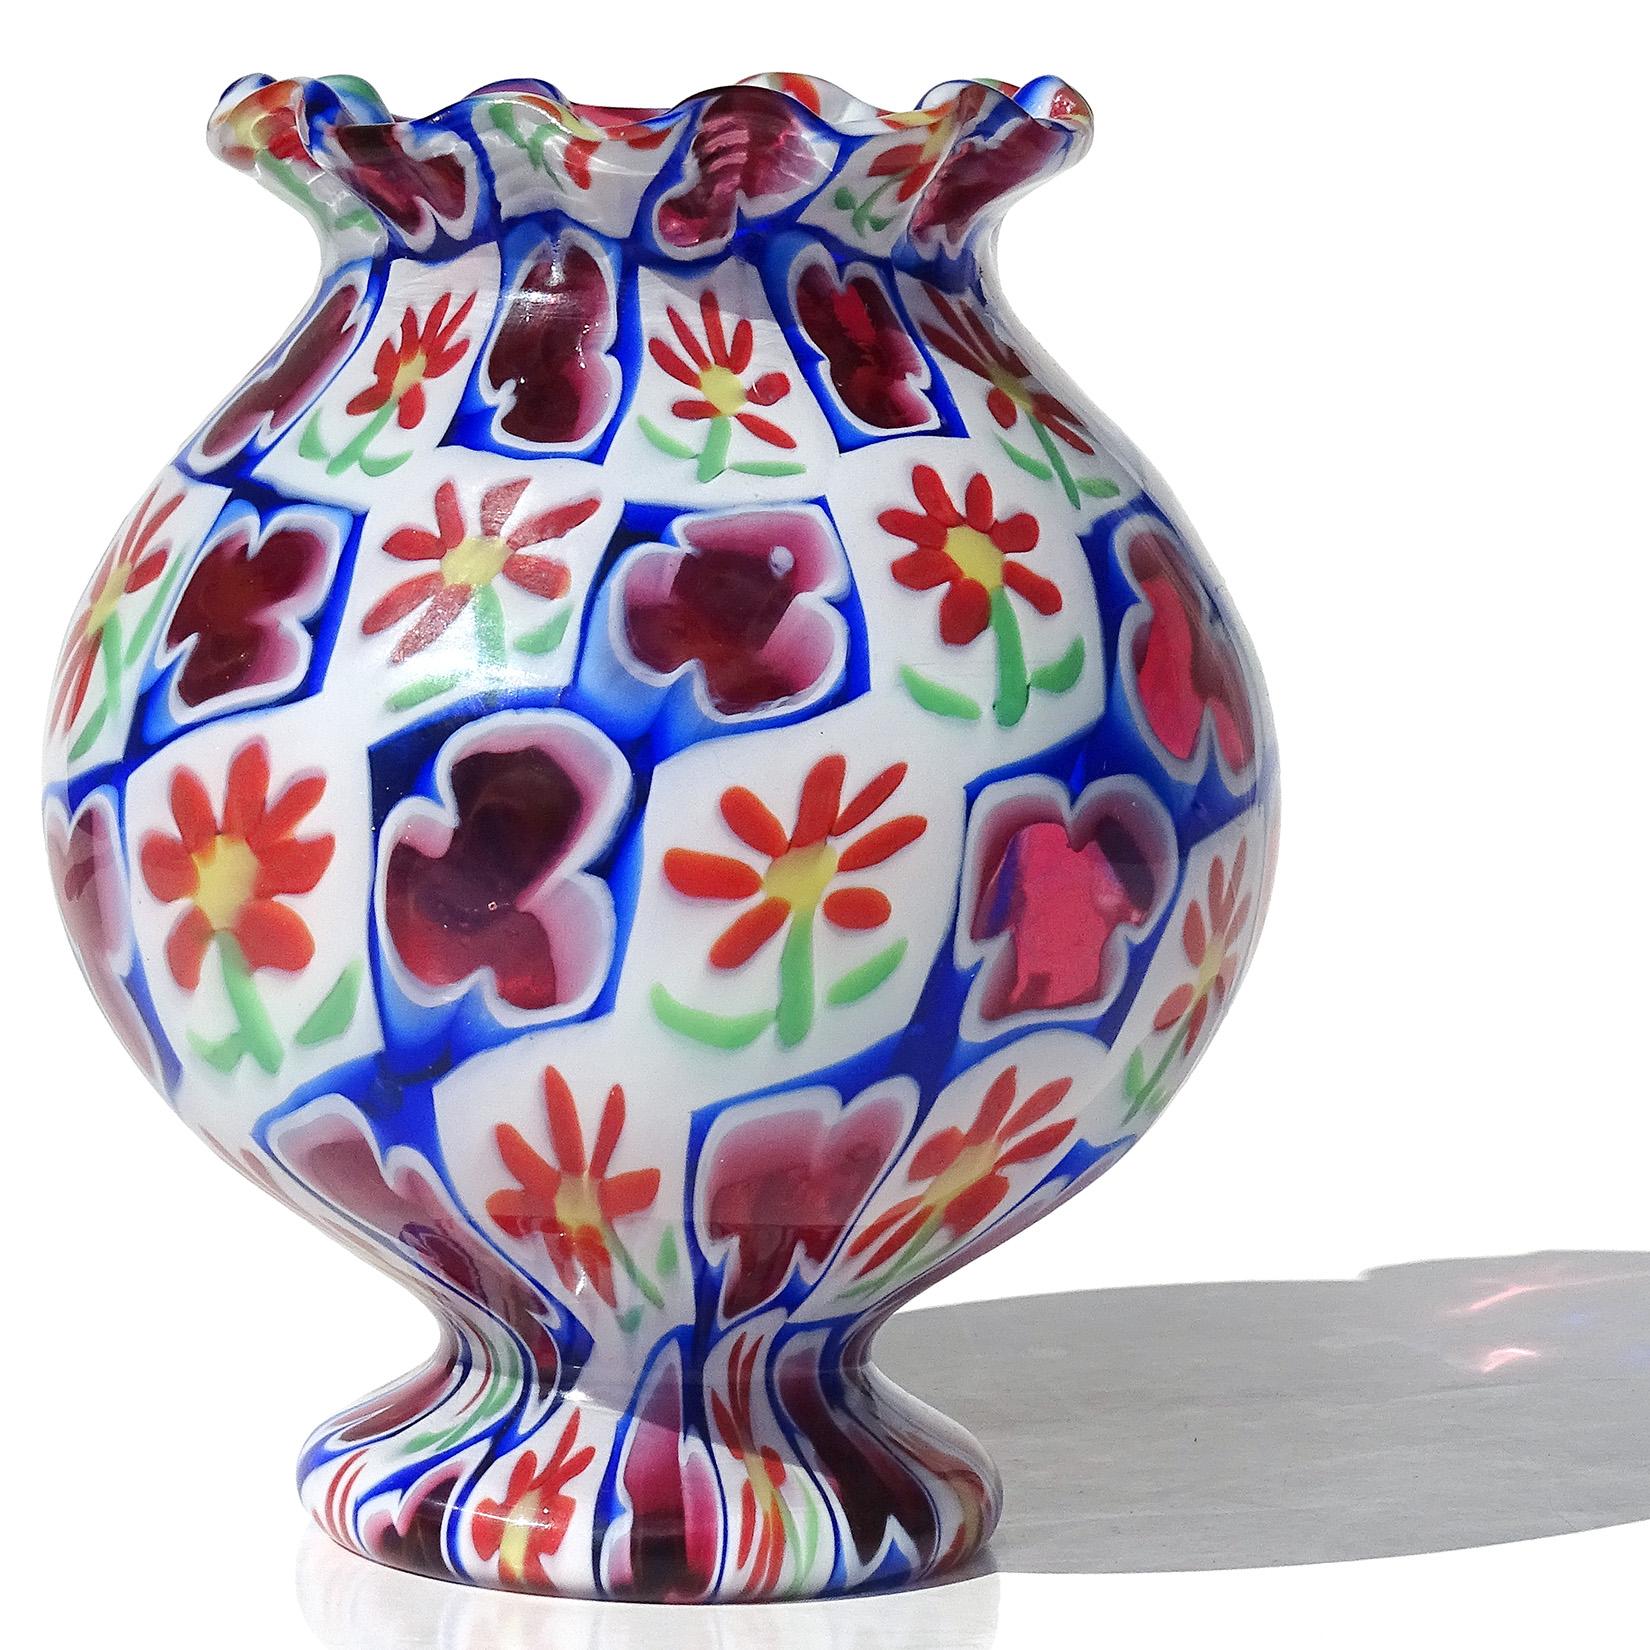 Beautiful vintage Murano hand blown Millefiori Murrina daisy flowers and clovers Italian art glass mosaic cabinet / bud vase. Documented to the Fratelli Toso Company. The vase has a crimped ruffle rim, with very unusual bulb shape and pattern. The